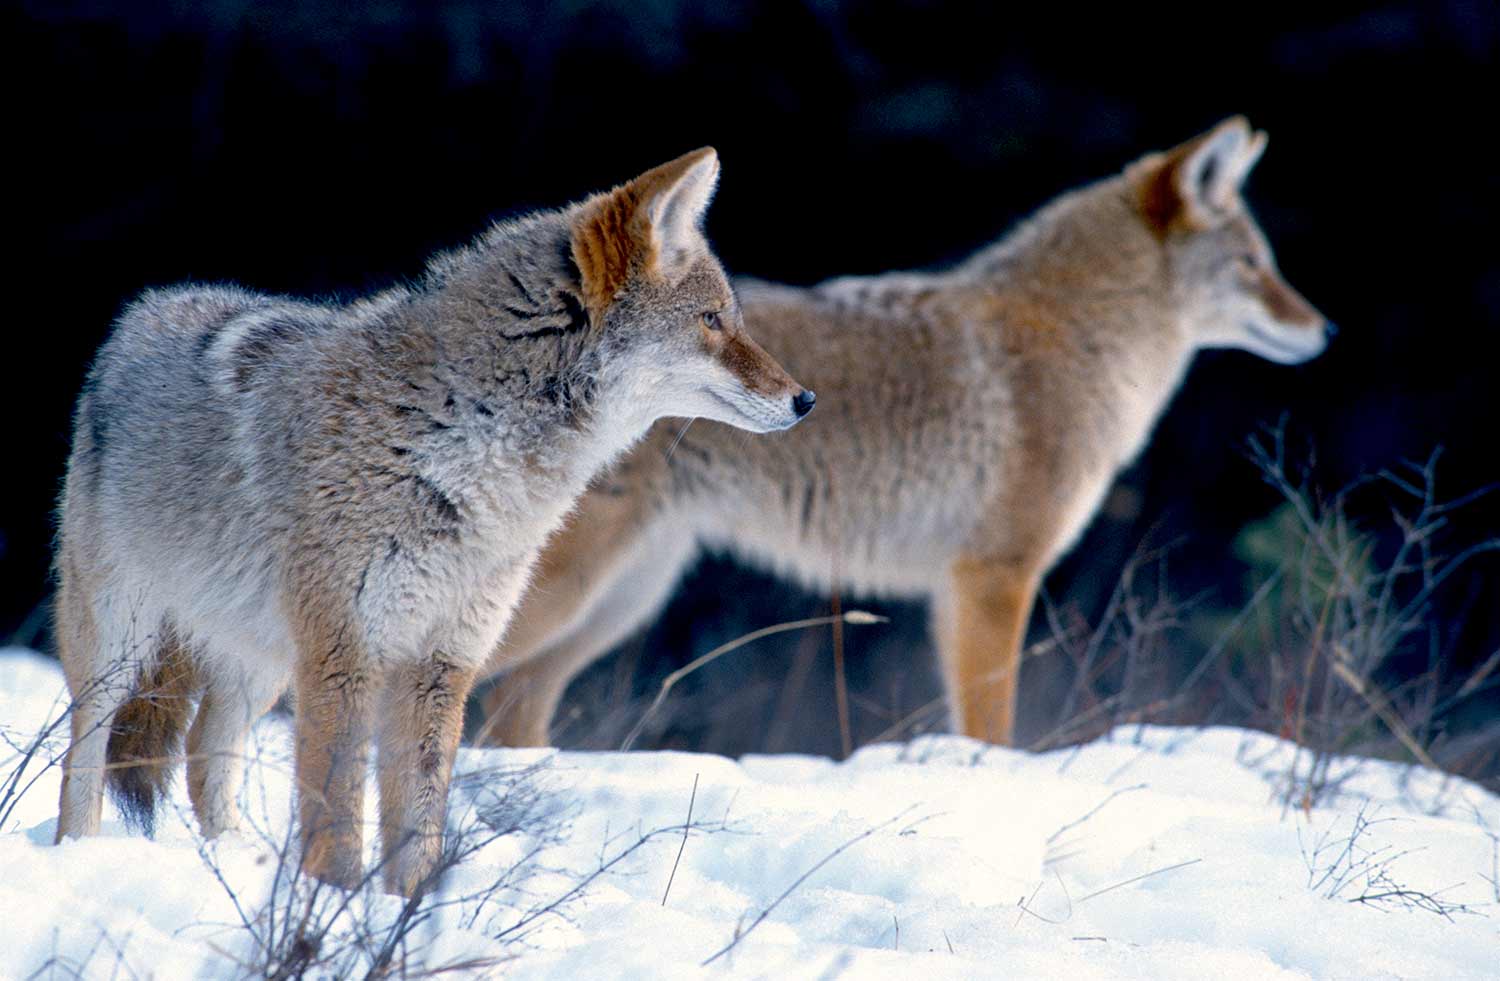 two coyotes standing in the snow.